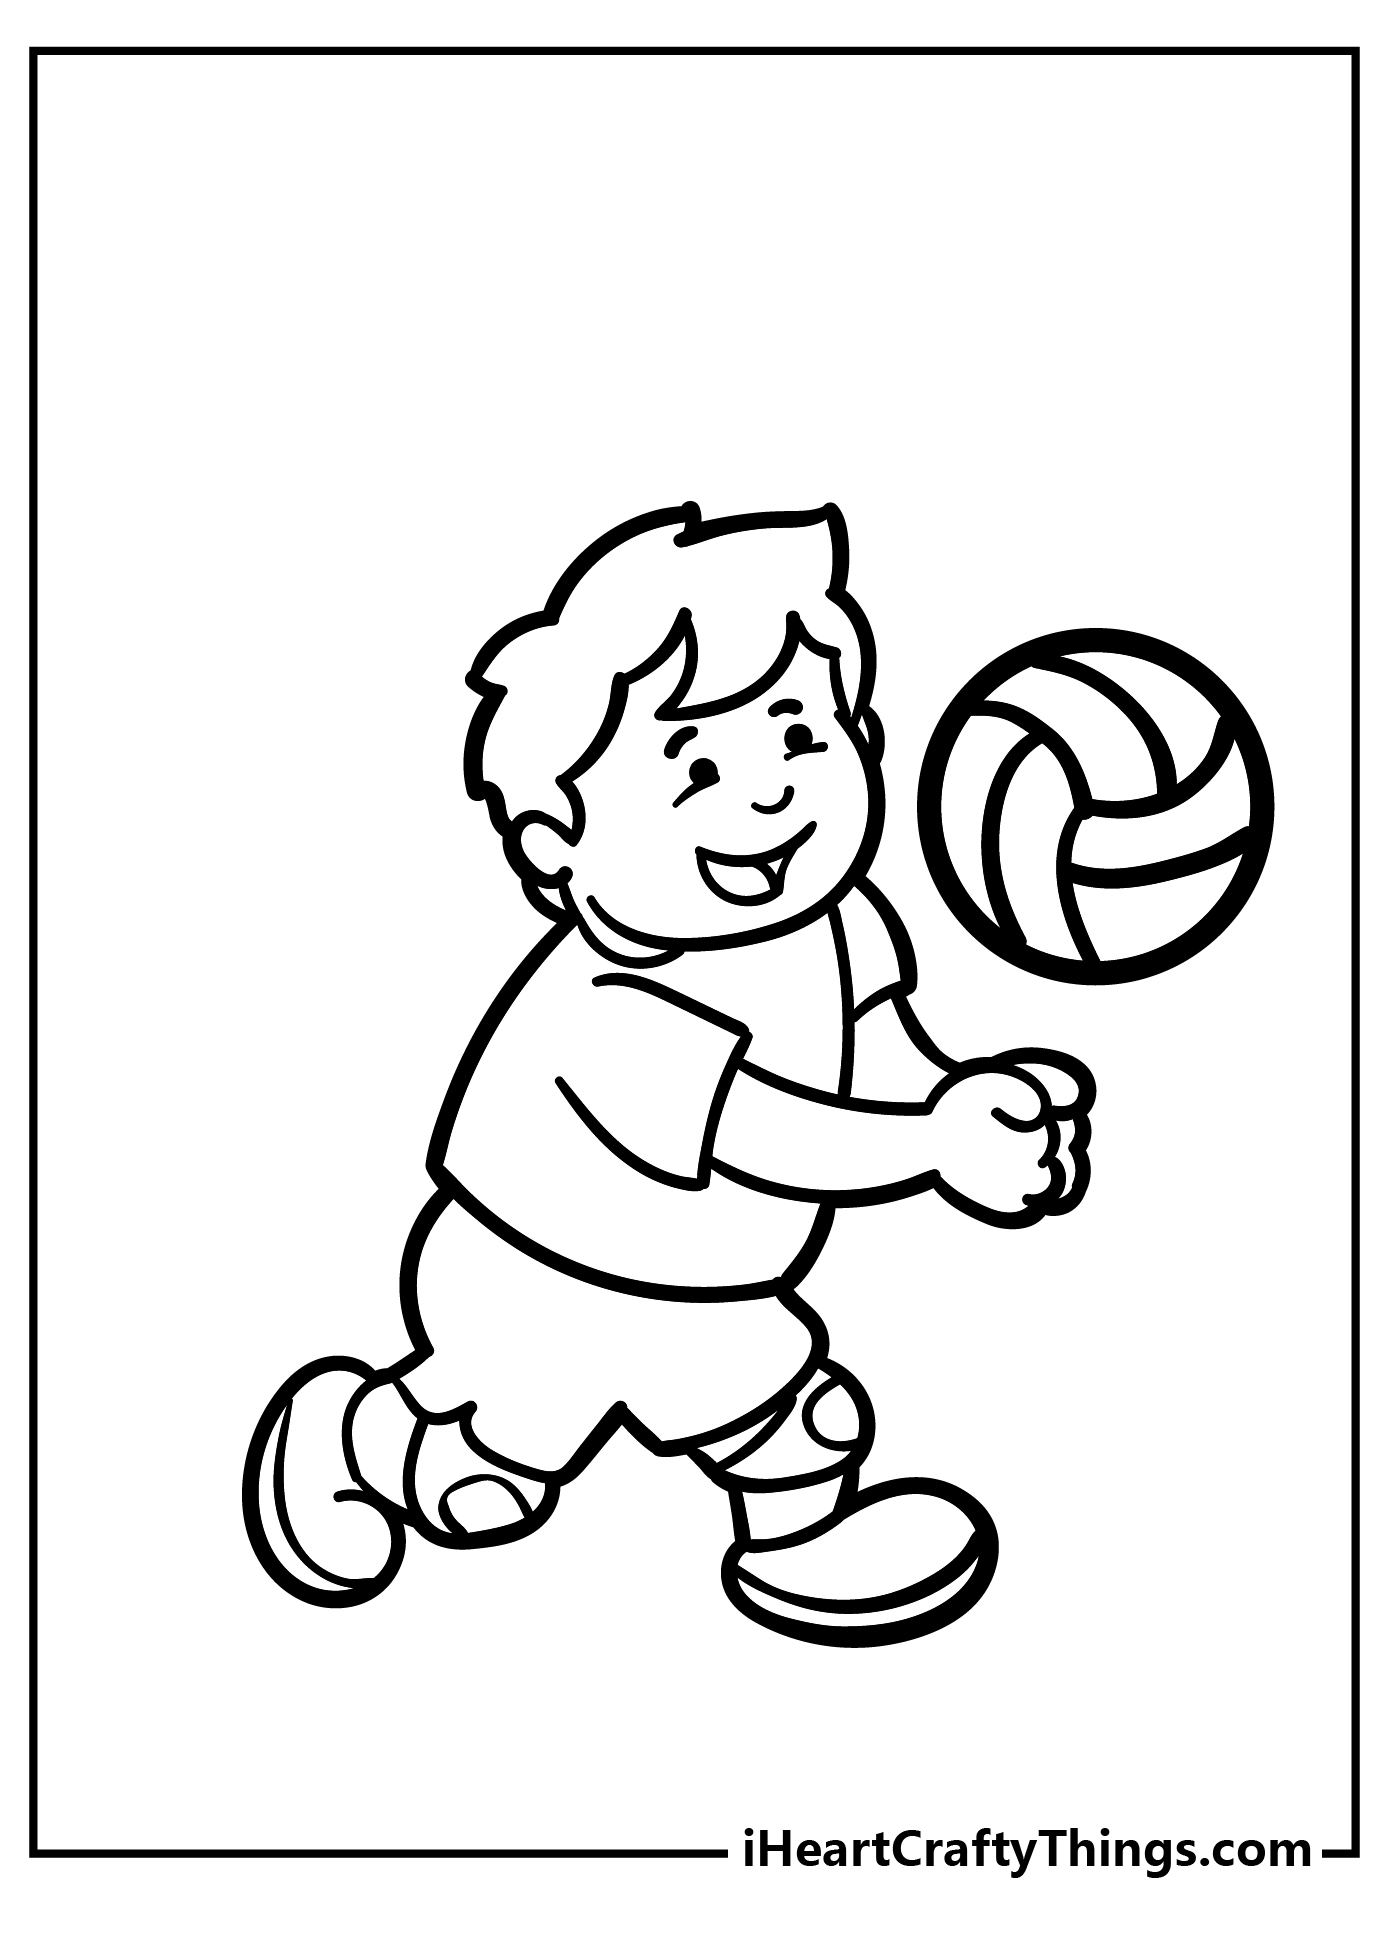 Volleyball Coloring Book for kids free printable